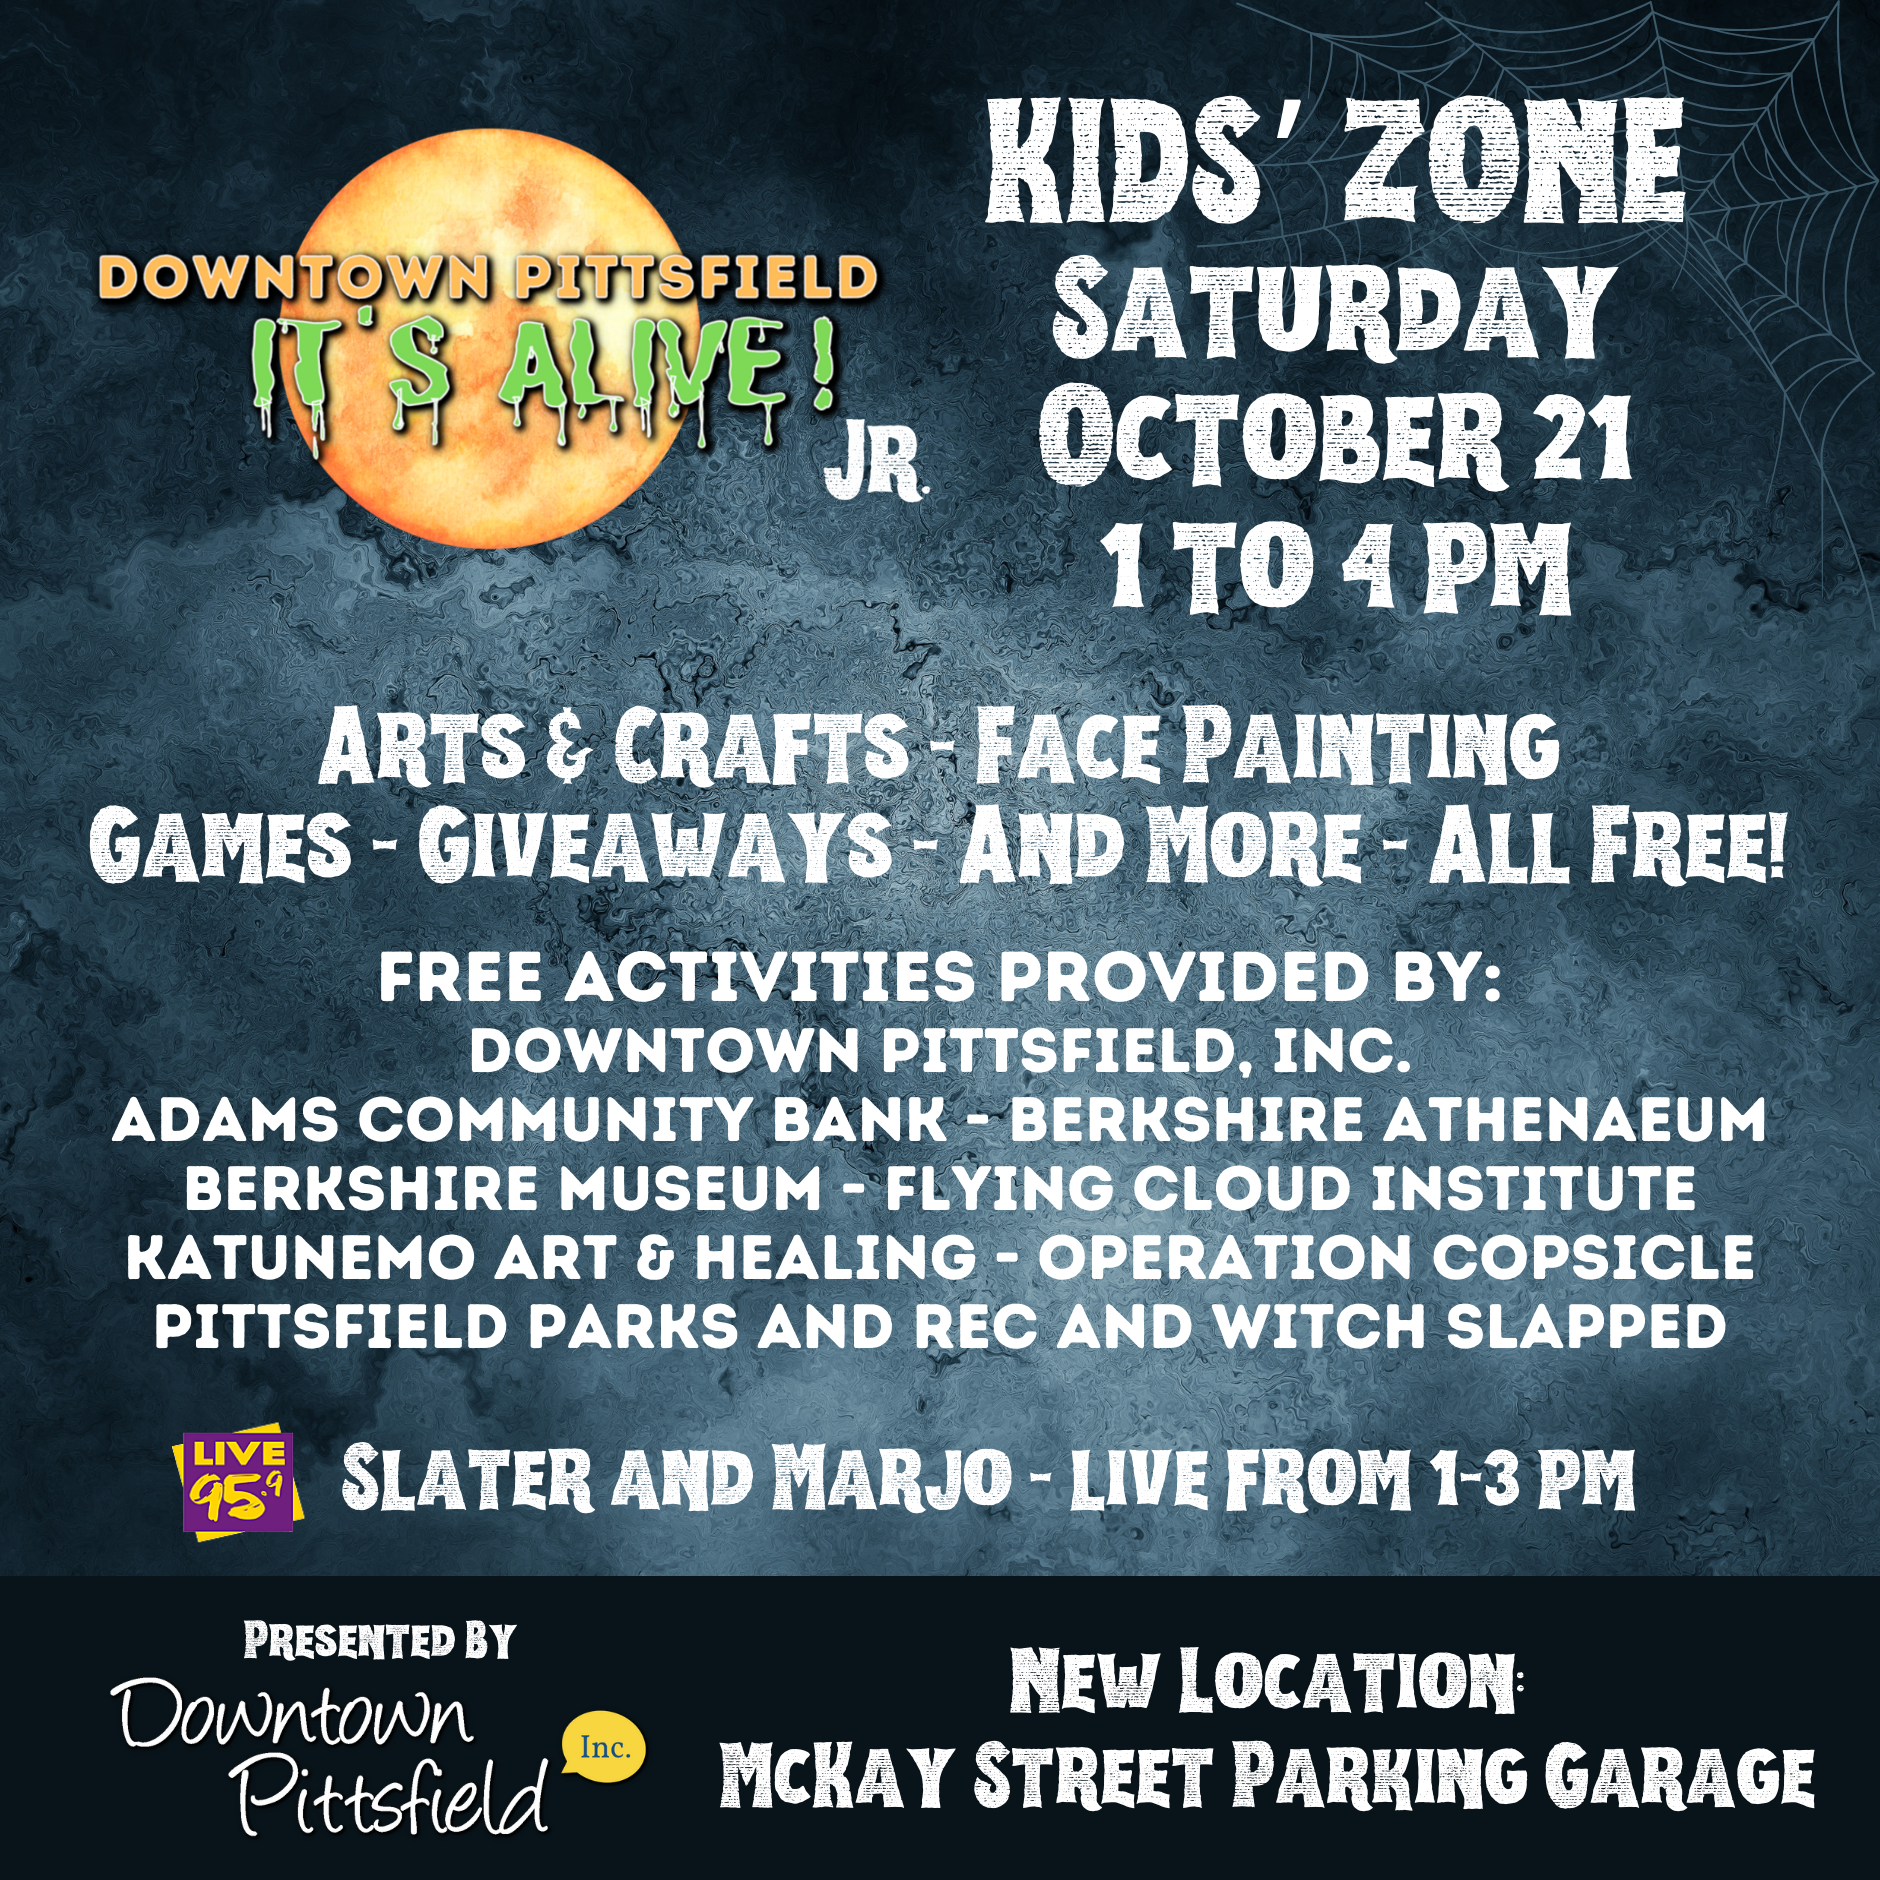 Downtown Pittsfield... It's Alive! JR. Kids' Zone: Saturday, October 21, 1 to 4 pm